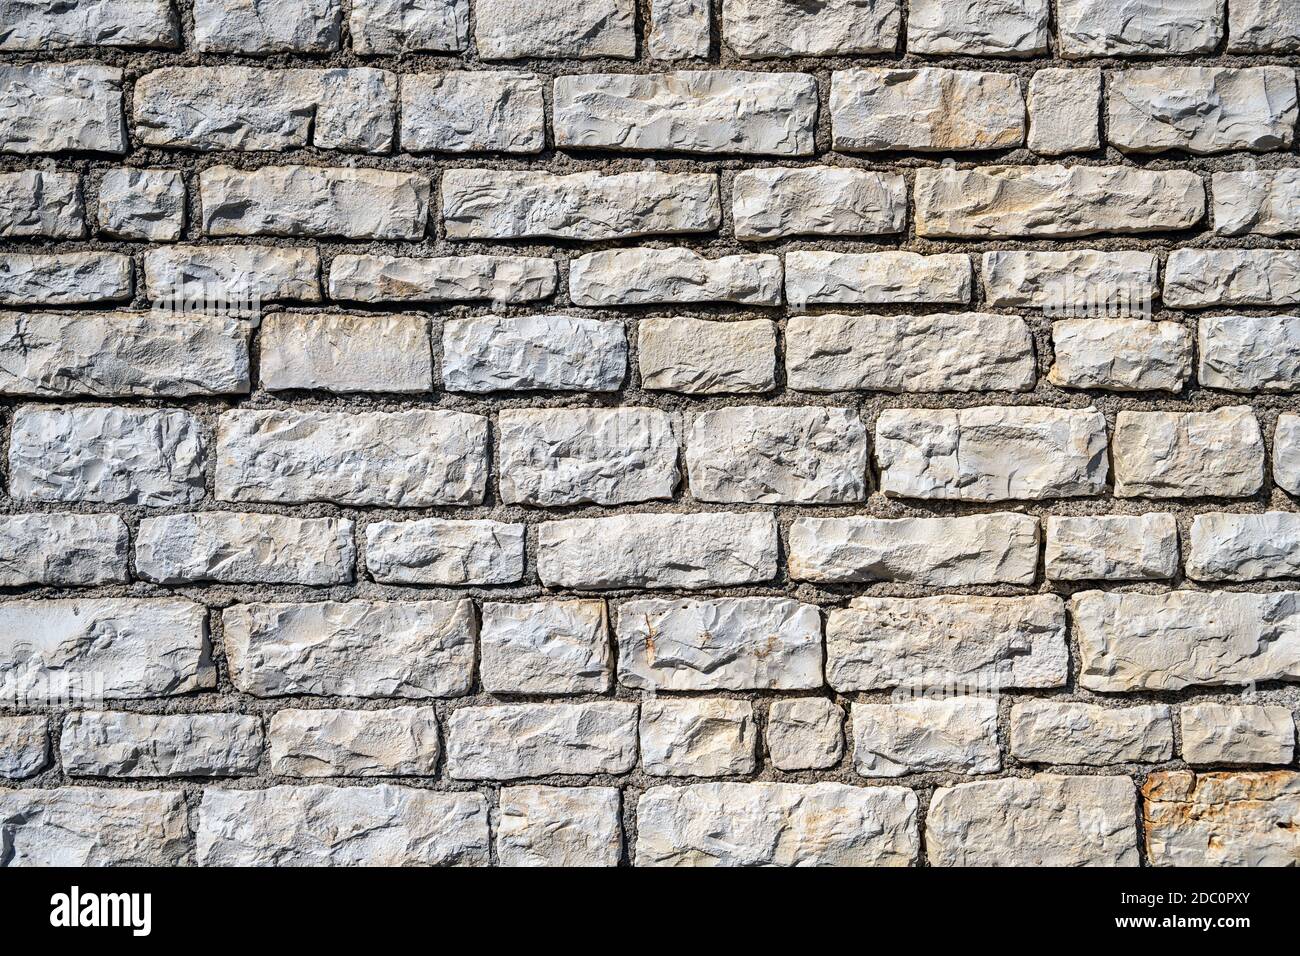 Background from an uniform natural stone wall Stock Photo